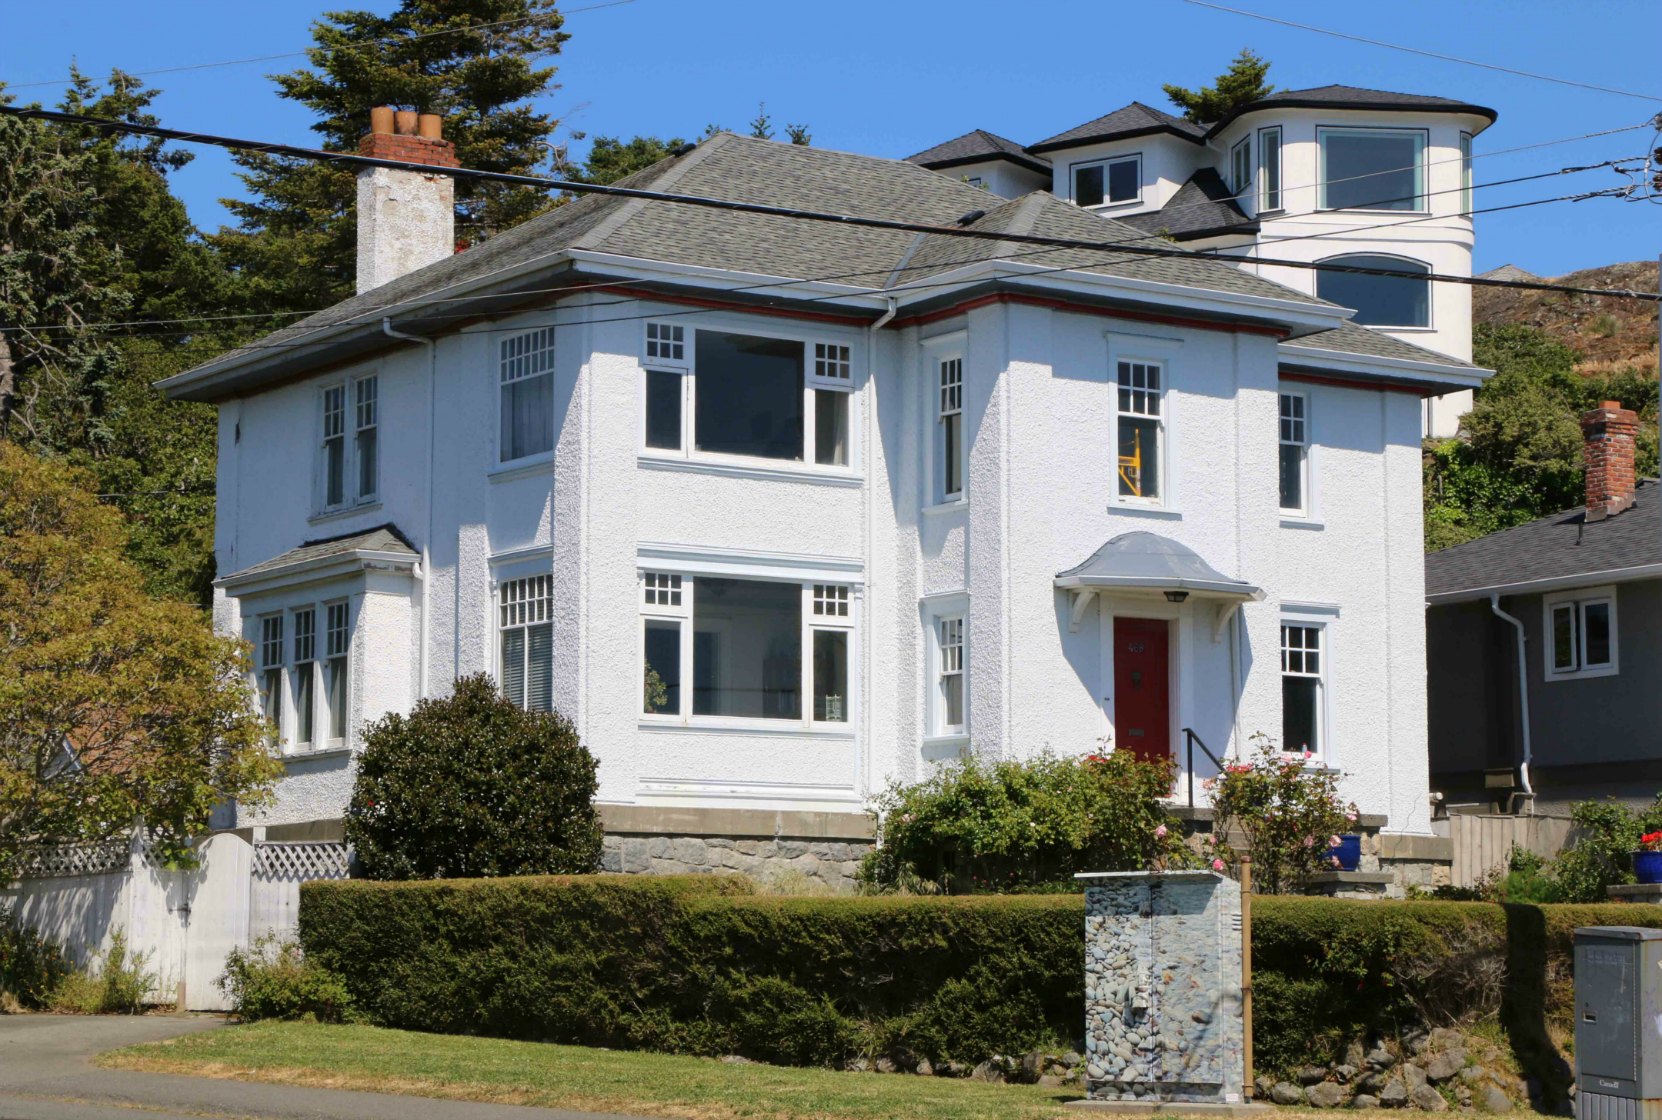 468 Beach Drive, built in 1920 by architect Samuel Maclure for Ernest Halsall